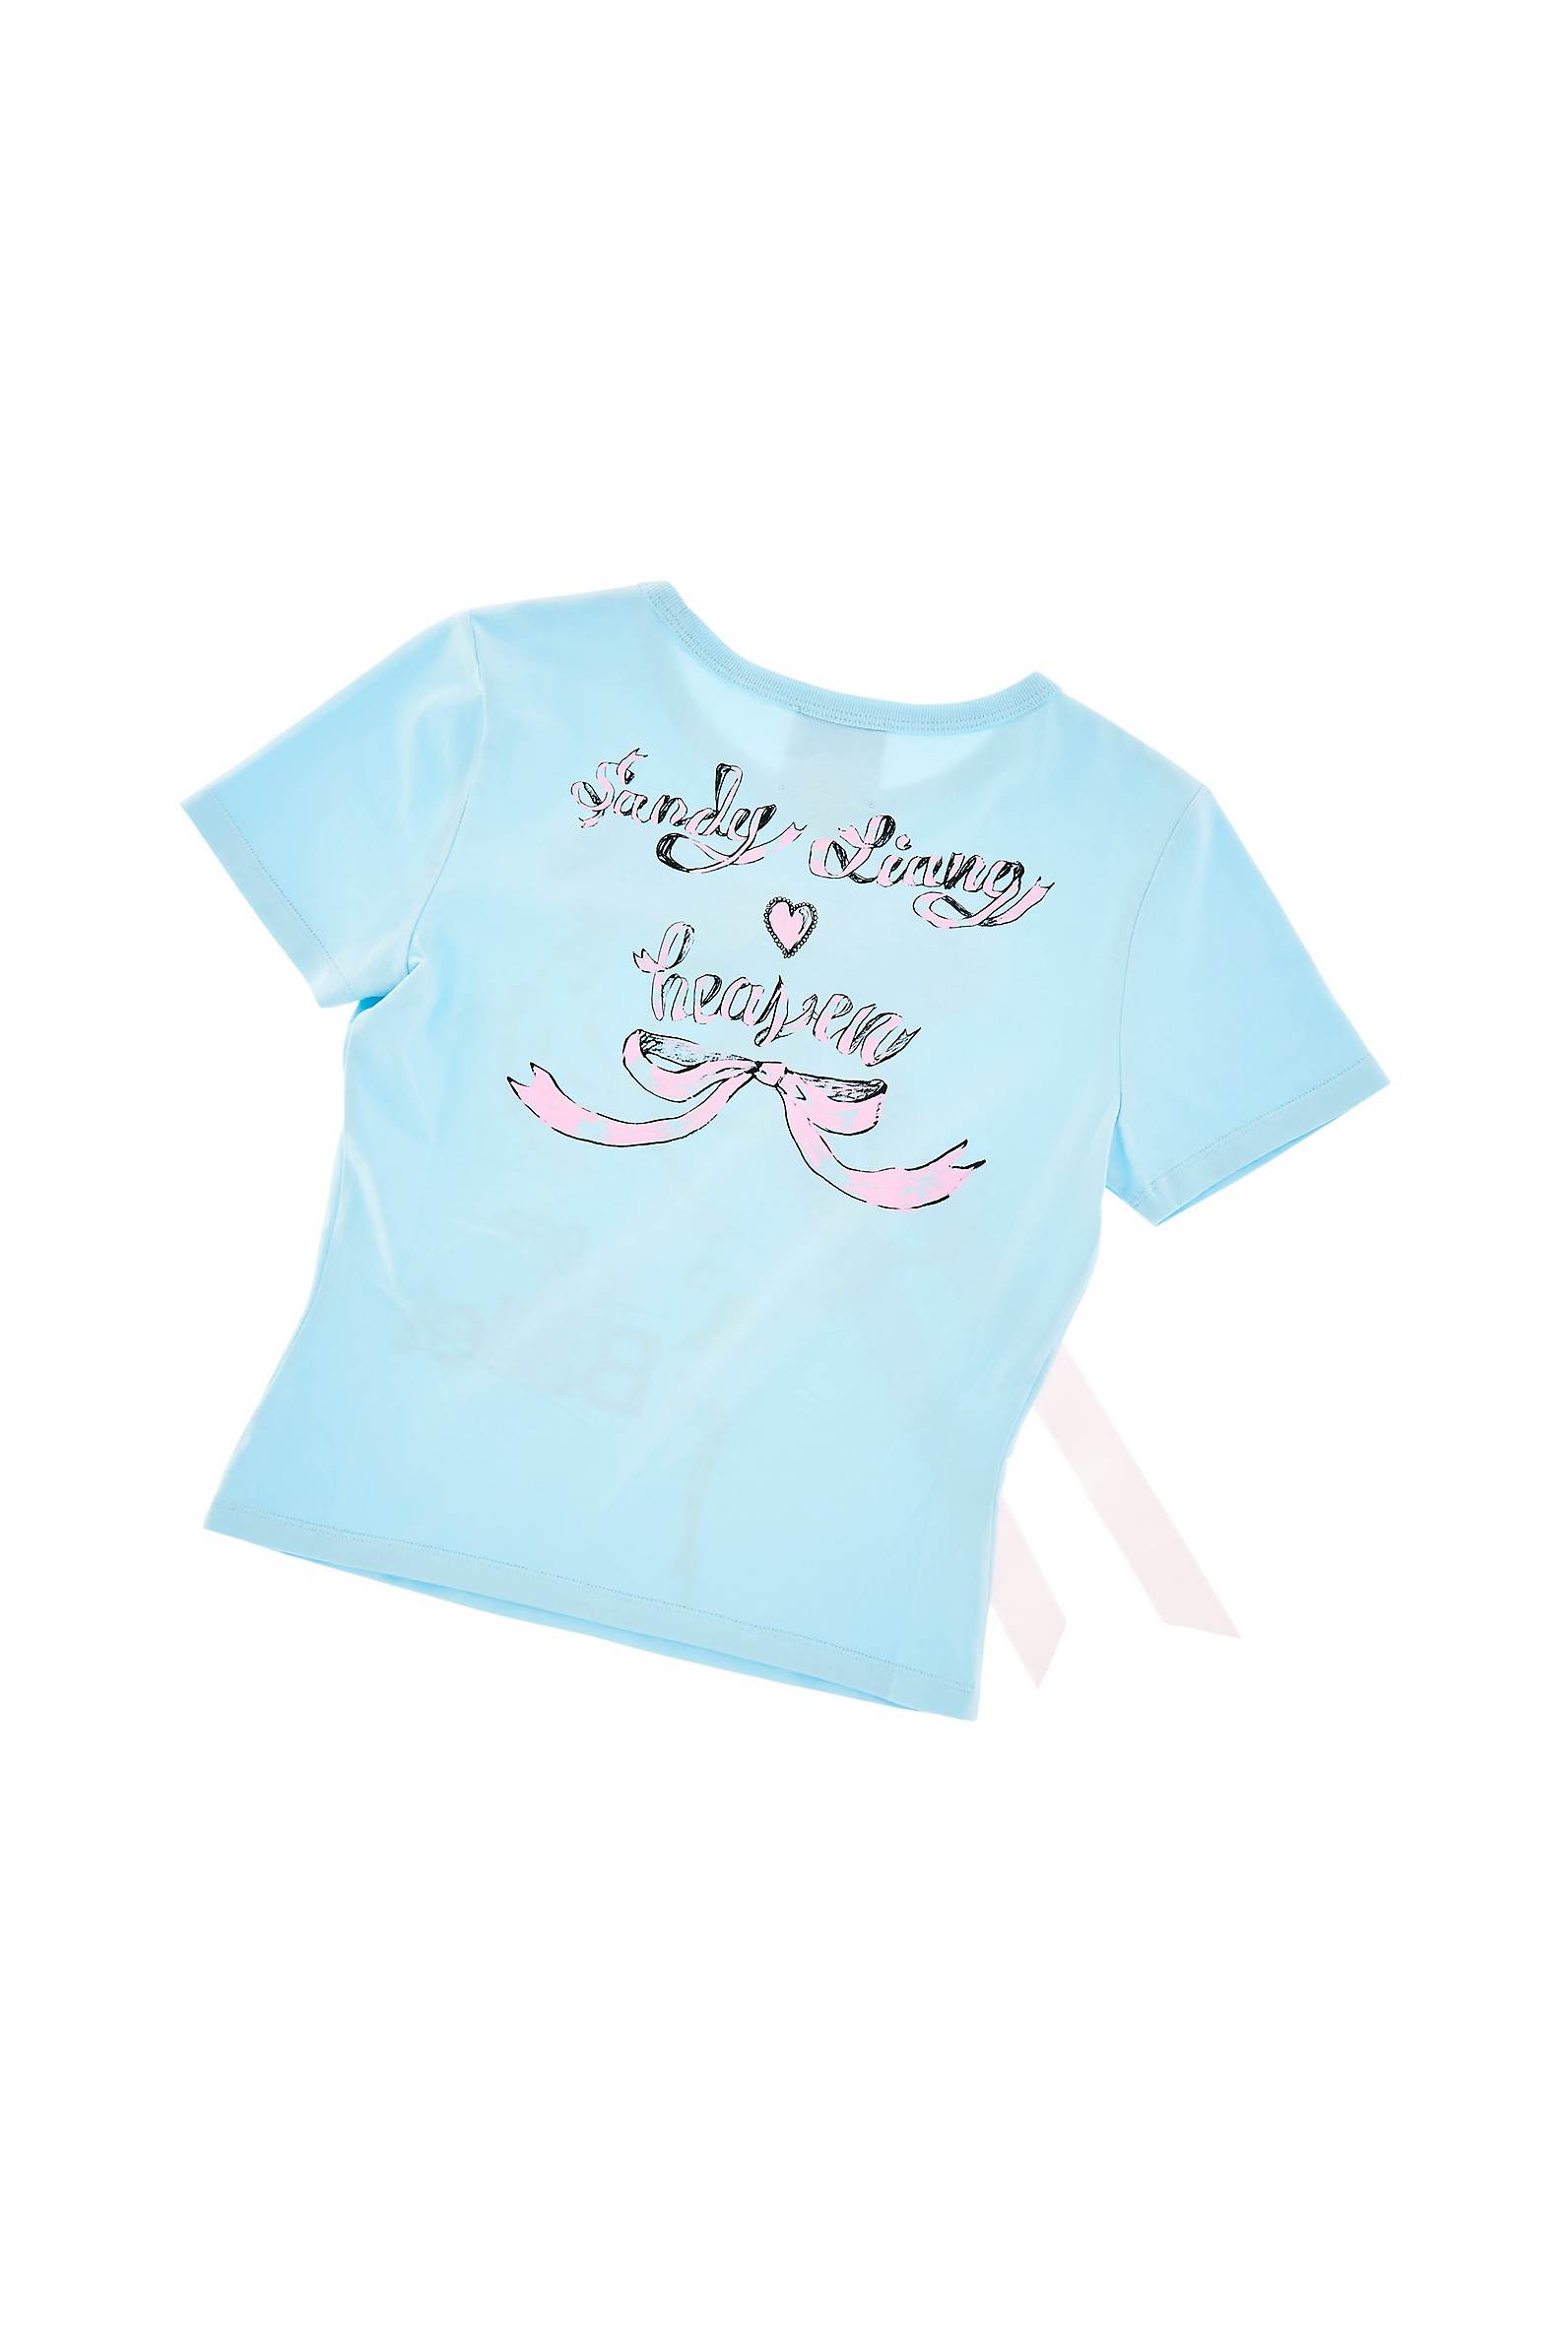 SANDY LIANG RIBBON BABY TEE Marc Jacobs | Official Site